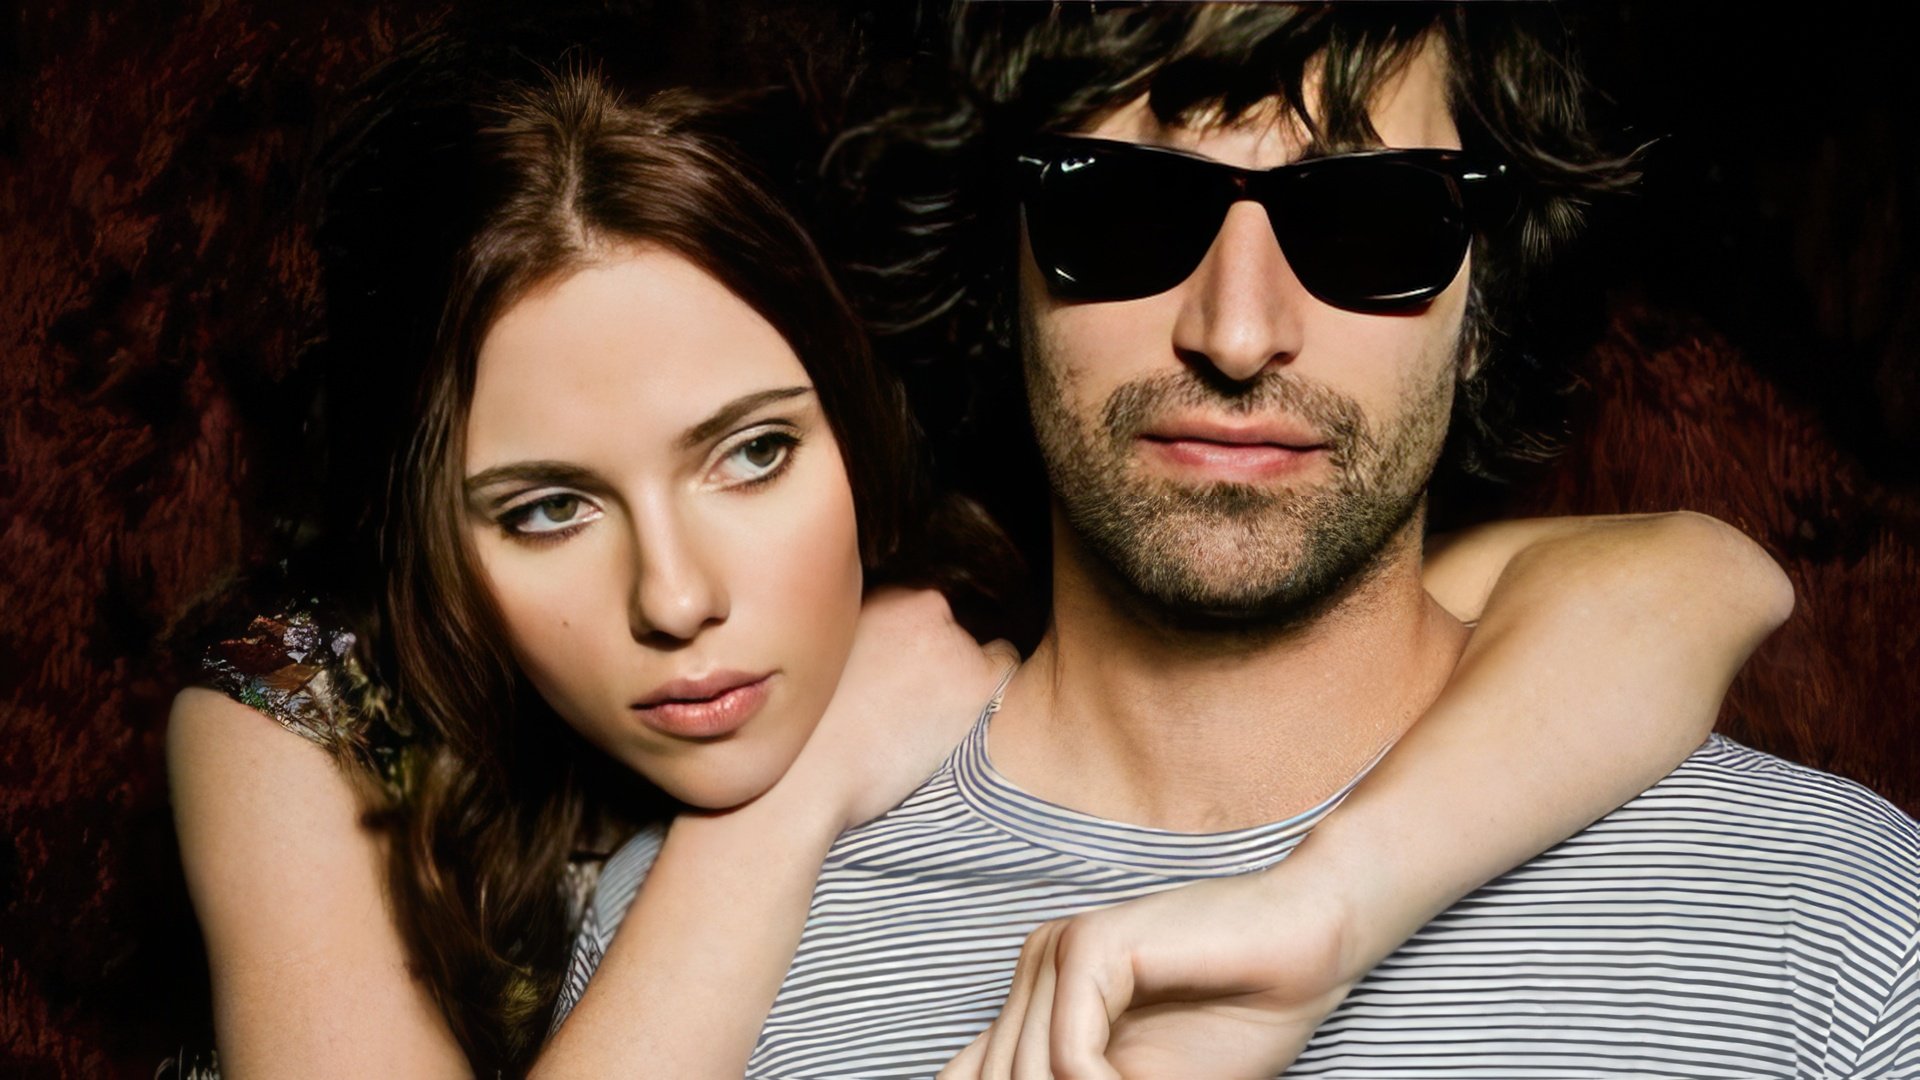 In 2007 Scarlett Johansson and Pete Yorn recorded a joint album